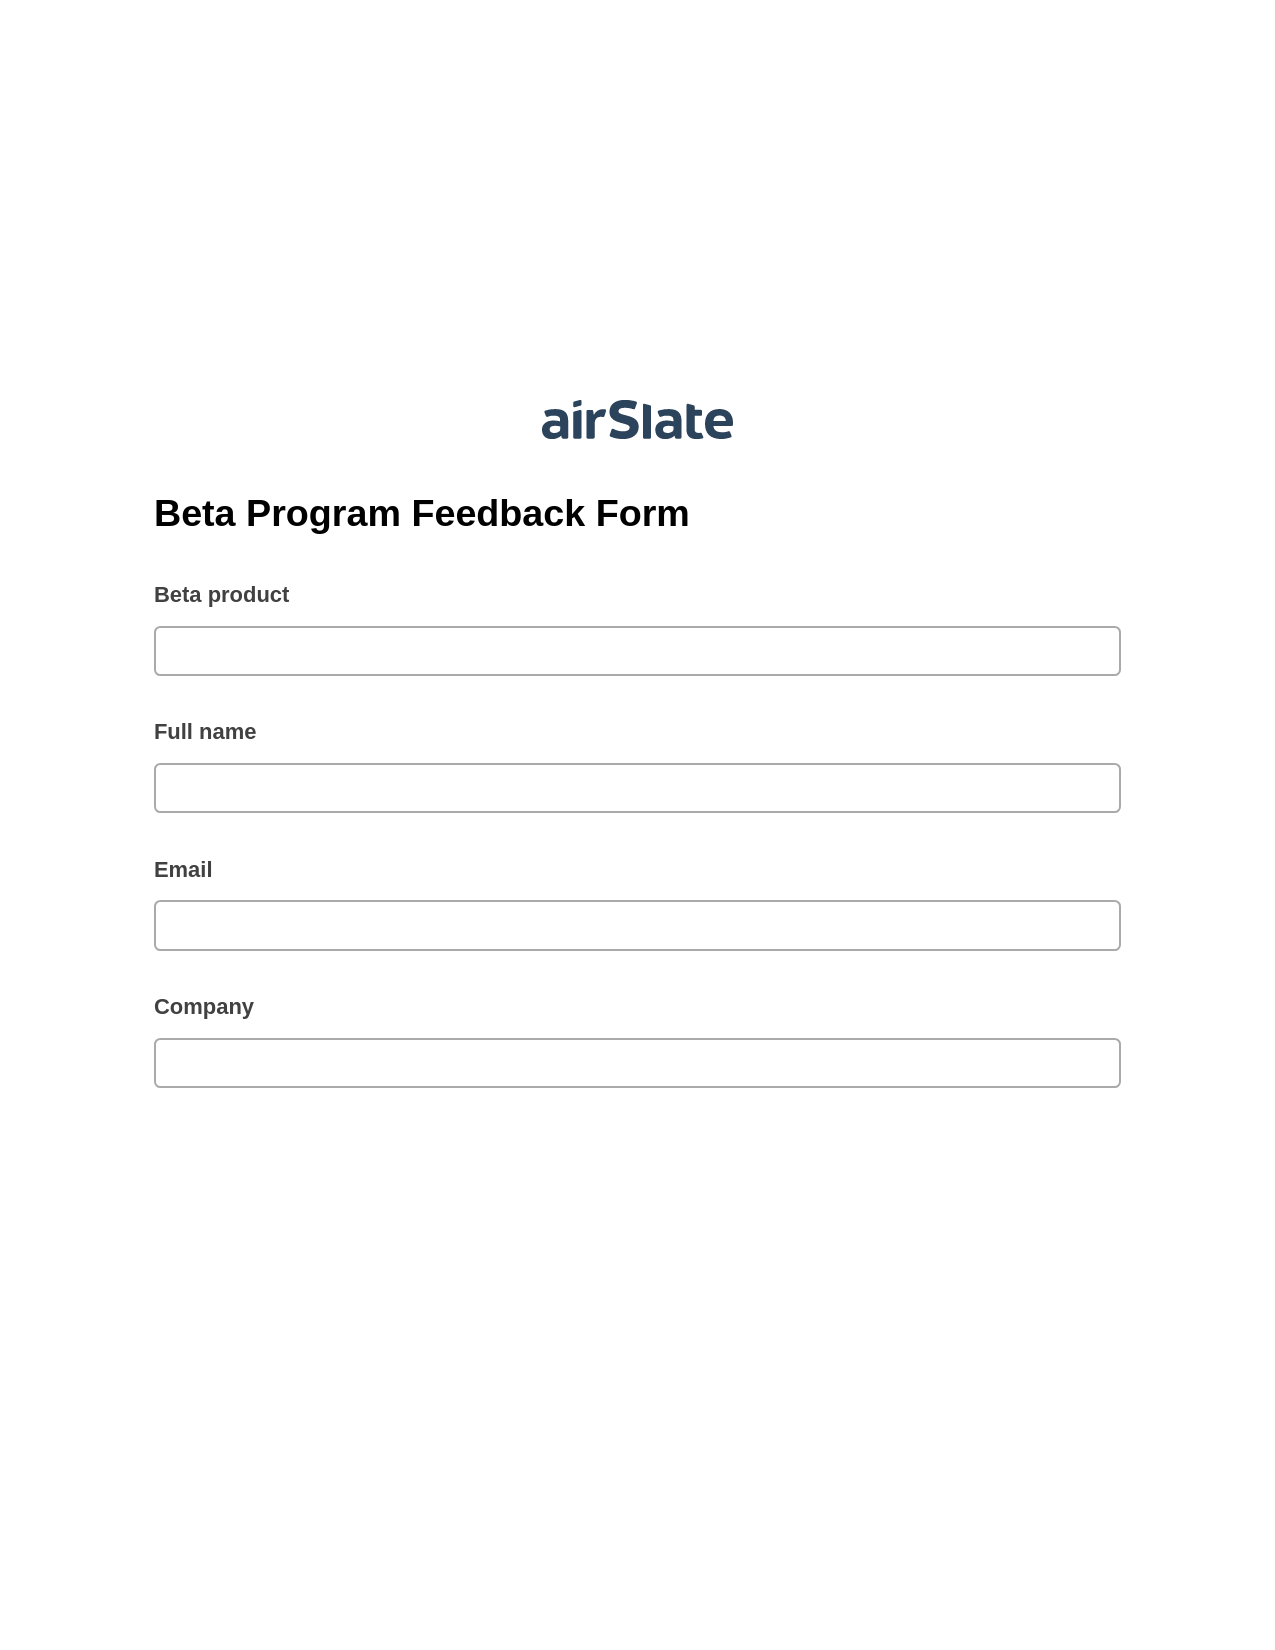 Multirole Beta Program Feedback Form Pre-fill from NetSuite Records Bot, Roles Reminder Bot, Box Bot